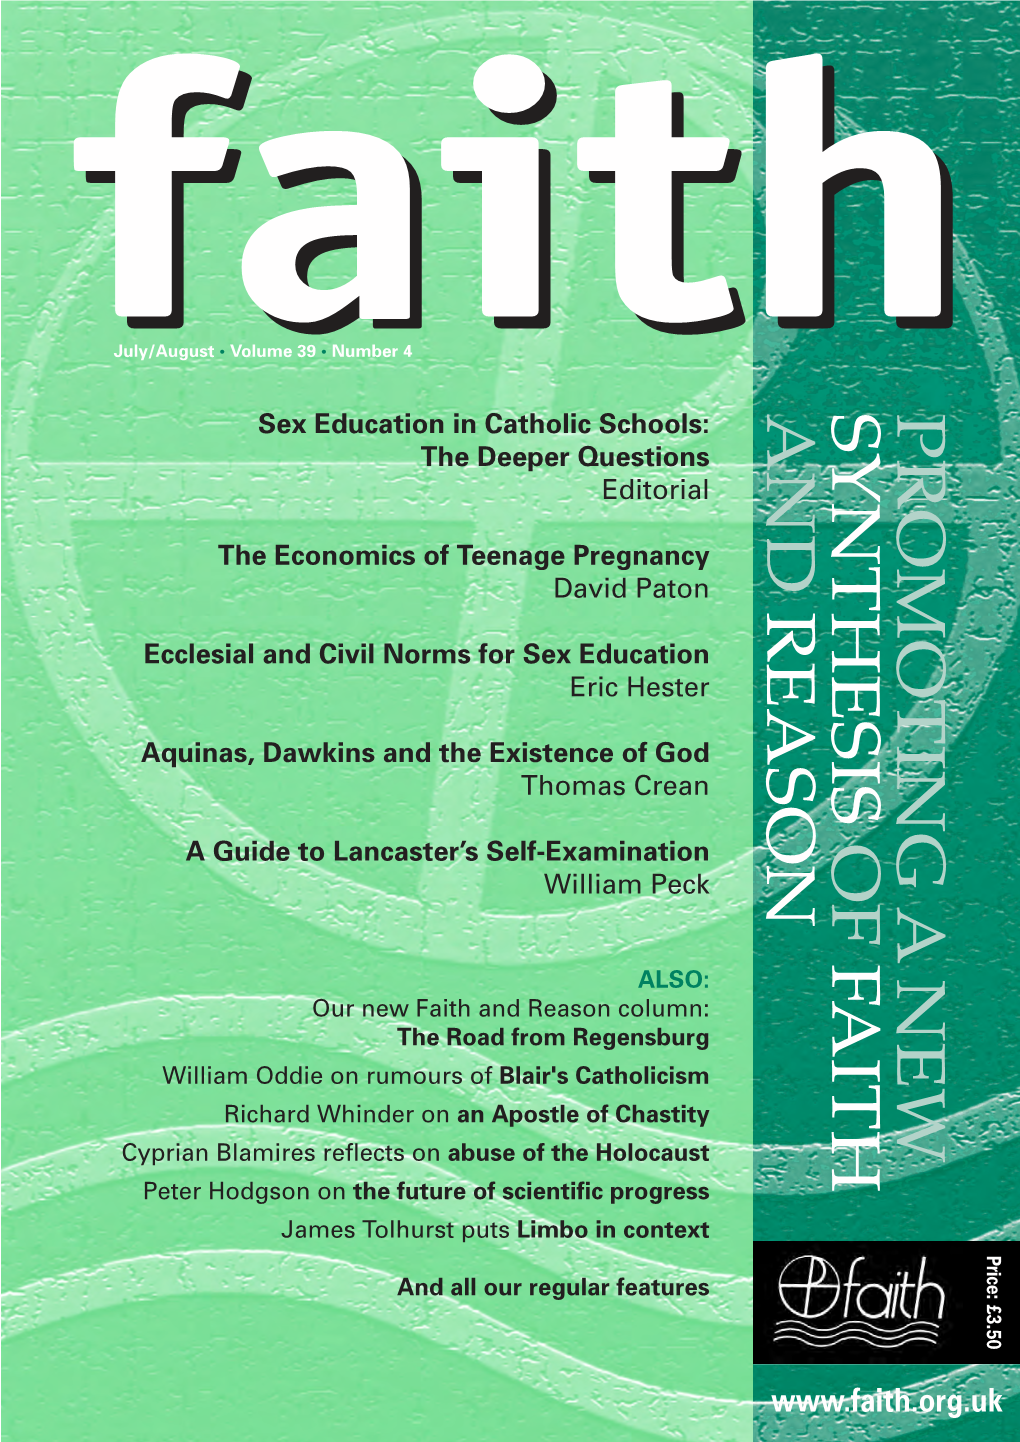 Sex Education in Catholic Schools: and SYNTHESIS PROMOTING ANEW the Deeper Questions Editorial